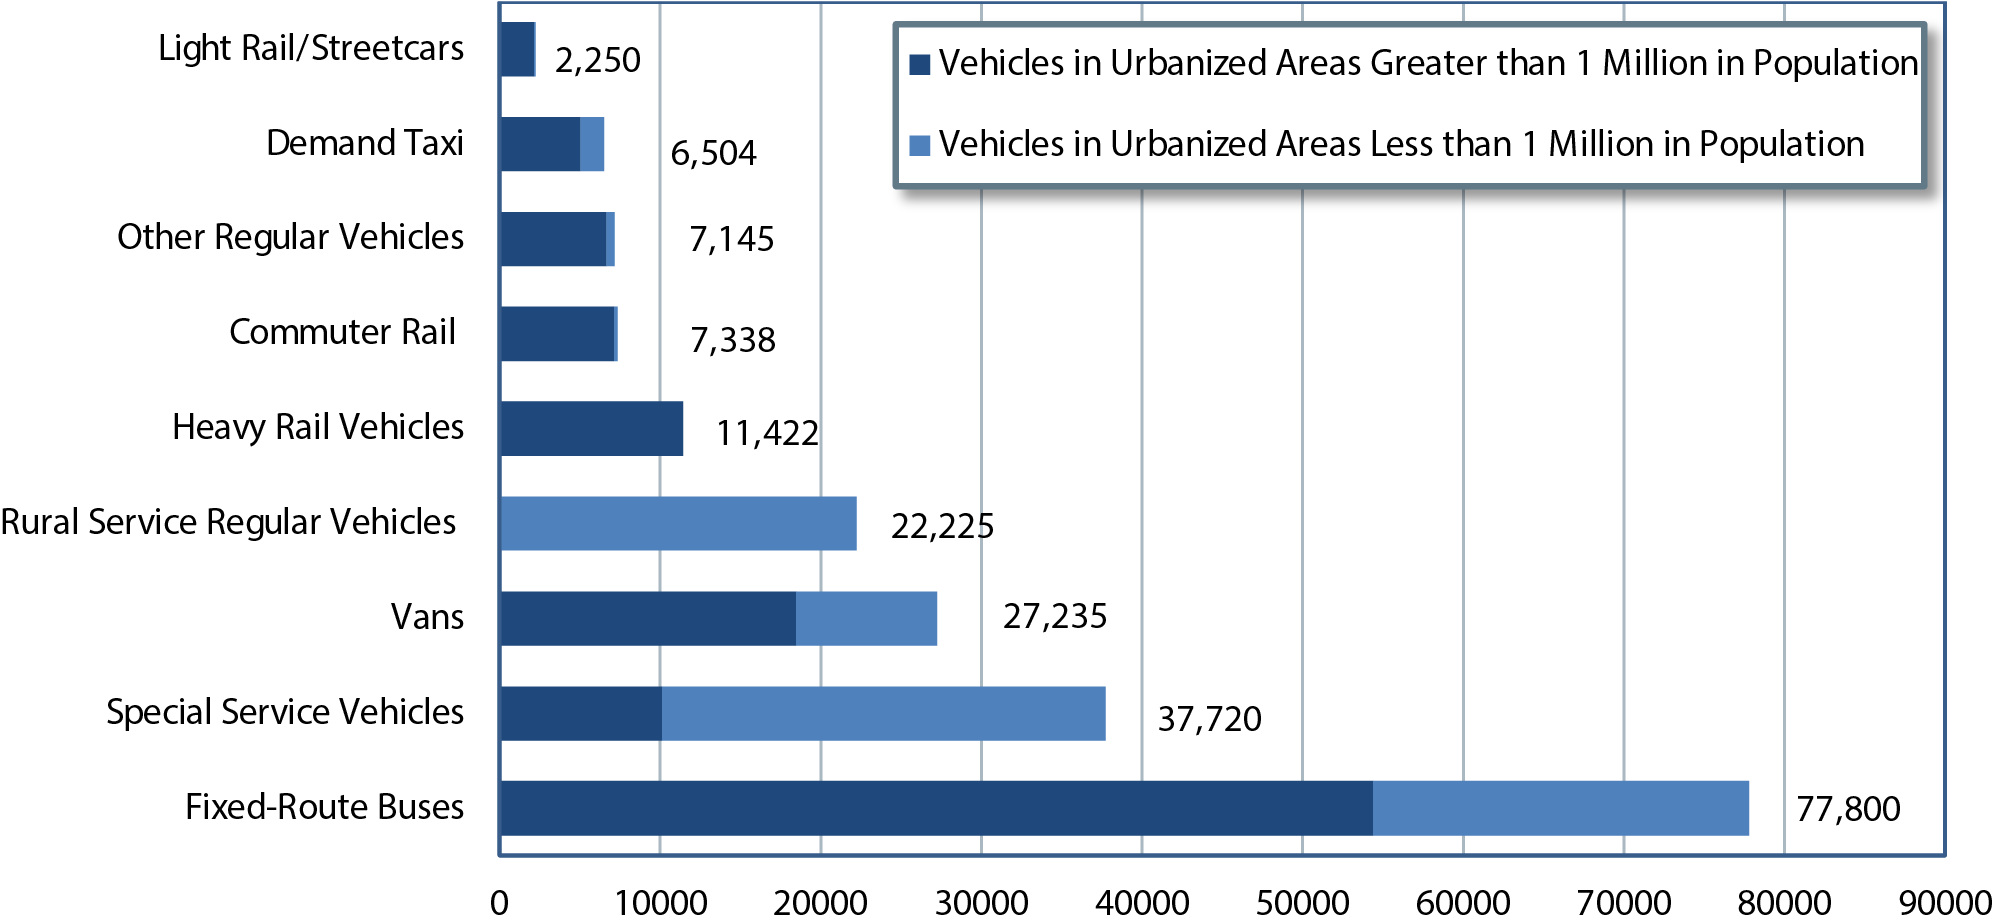 A stacked horizontal bar chart shows the distribution of fleet vehicles in nine categories for two sizes of urban areas: areas with a population of less than 1 million and areas with a population of more than 1 million. Categories with fewer than 10,000 total vehicles include light rail/streetcars, demand taxi, other regular vehicles, and commuter rail with 2,250, 6,504, 7,145, and 7,338 vehicles, predominately in the higher population areas. The category with just over 10,000 total vehicles include heavy rail vehicles with 11,422 vehicles, all in areas with over 1 million population. The category rural service regular vehicles has a count of 22,225 vehicles, all in areas with under 1 million population. The category vans has a total count of 27,235 vehicles, with 18,468 in areas with more than 1 million population and 8,767 in areas with less than 1 million population. The category special service vehicles has a total count of 37,720 vehicles, with 10,107 in  areas with more than 1 million population and 27,613 in areas with less than 1 million population. The category fixed-route buses has a total count of 77,800 vehicles, with 54,374 in areas with more than 1 million population and 23,426 in areas with less than 1 million population. Source: National Transit Database. 